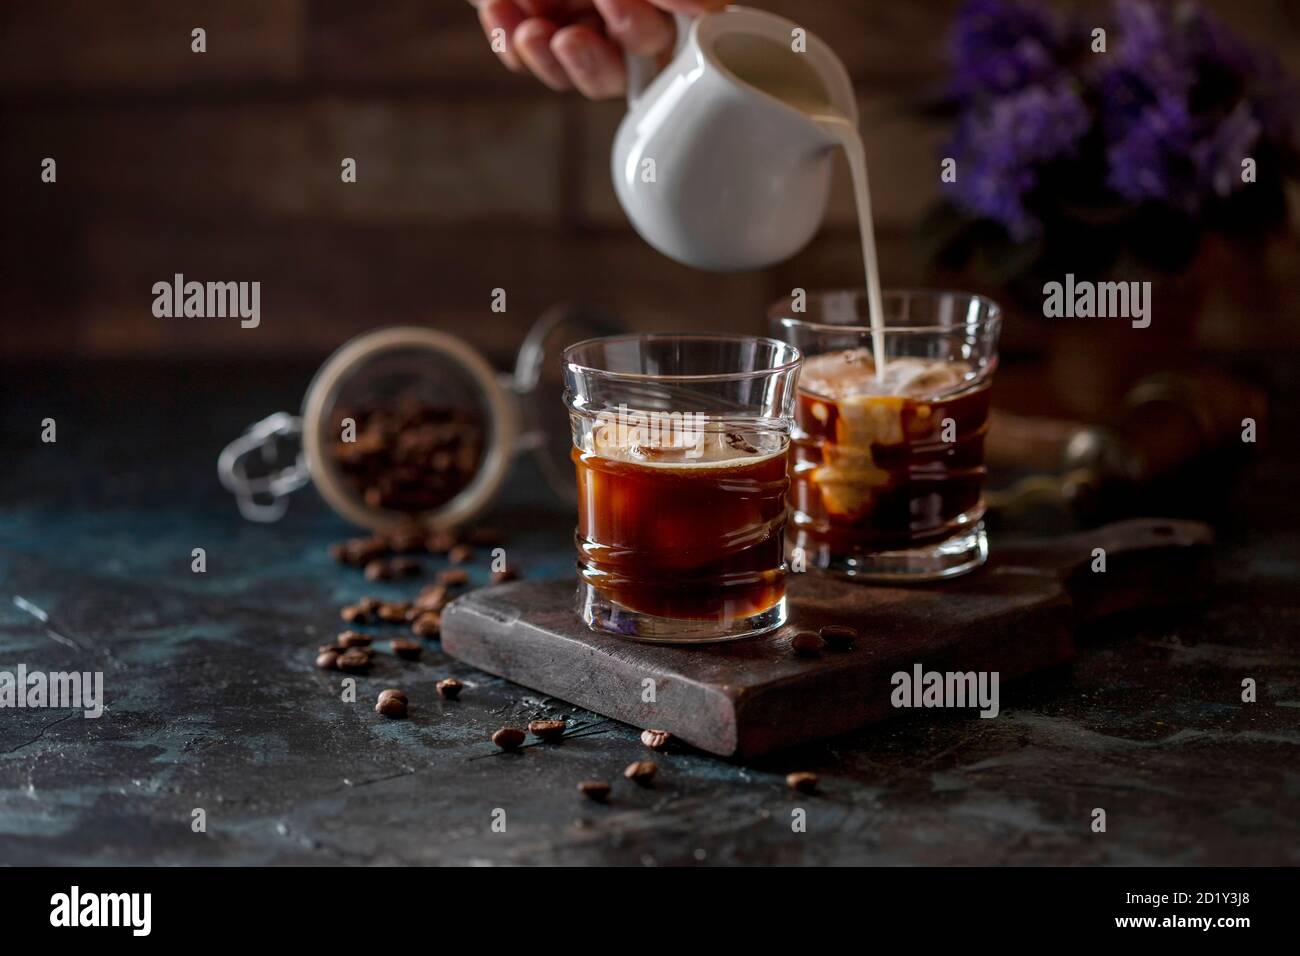 https://c8.alamy.com/comp/2D1Y3J8/ice-coffee-espresso-a-glasses-with-milk-being-poured-over-from-pitcher-by-hand-summer-refreshing-beverage-2D1Y3J8.jpg